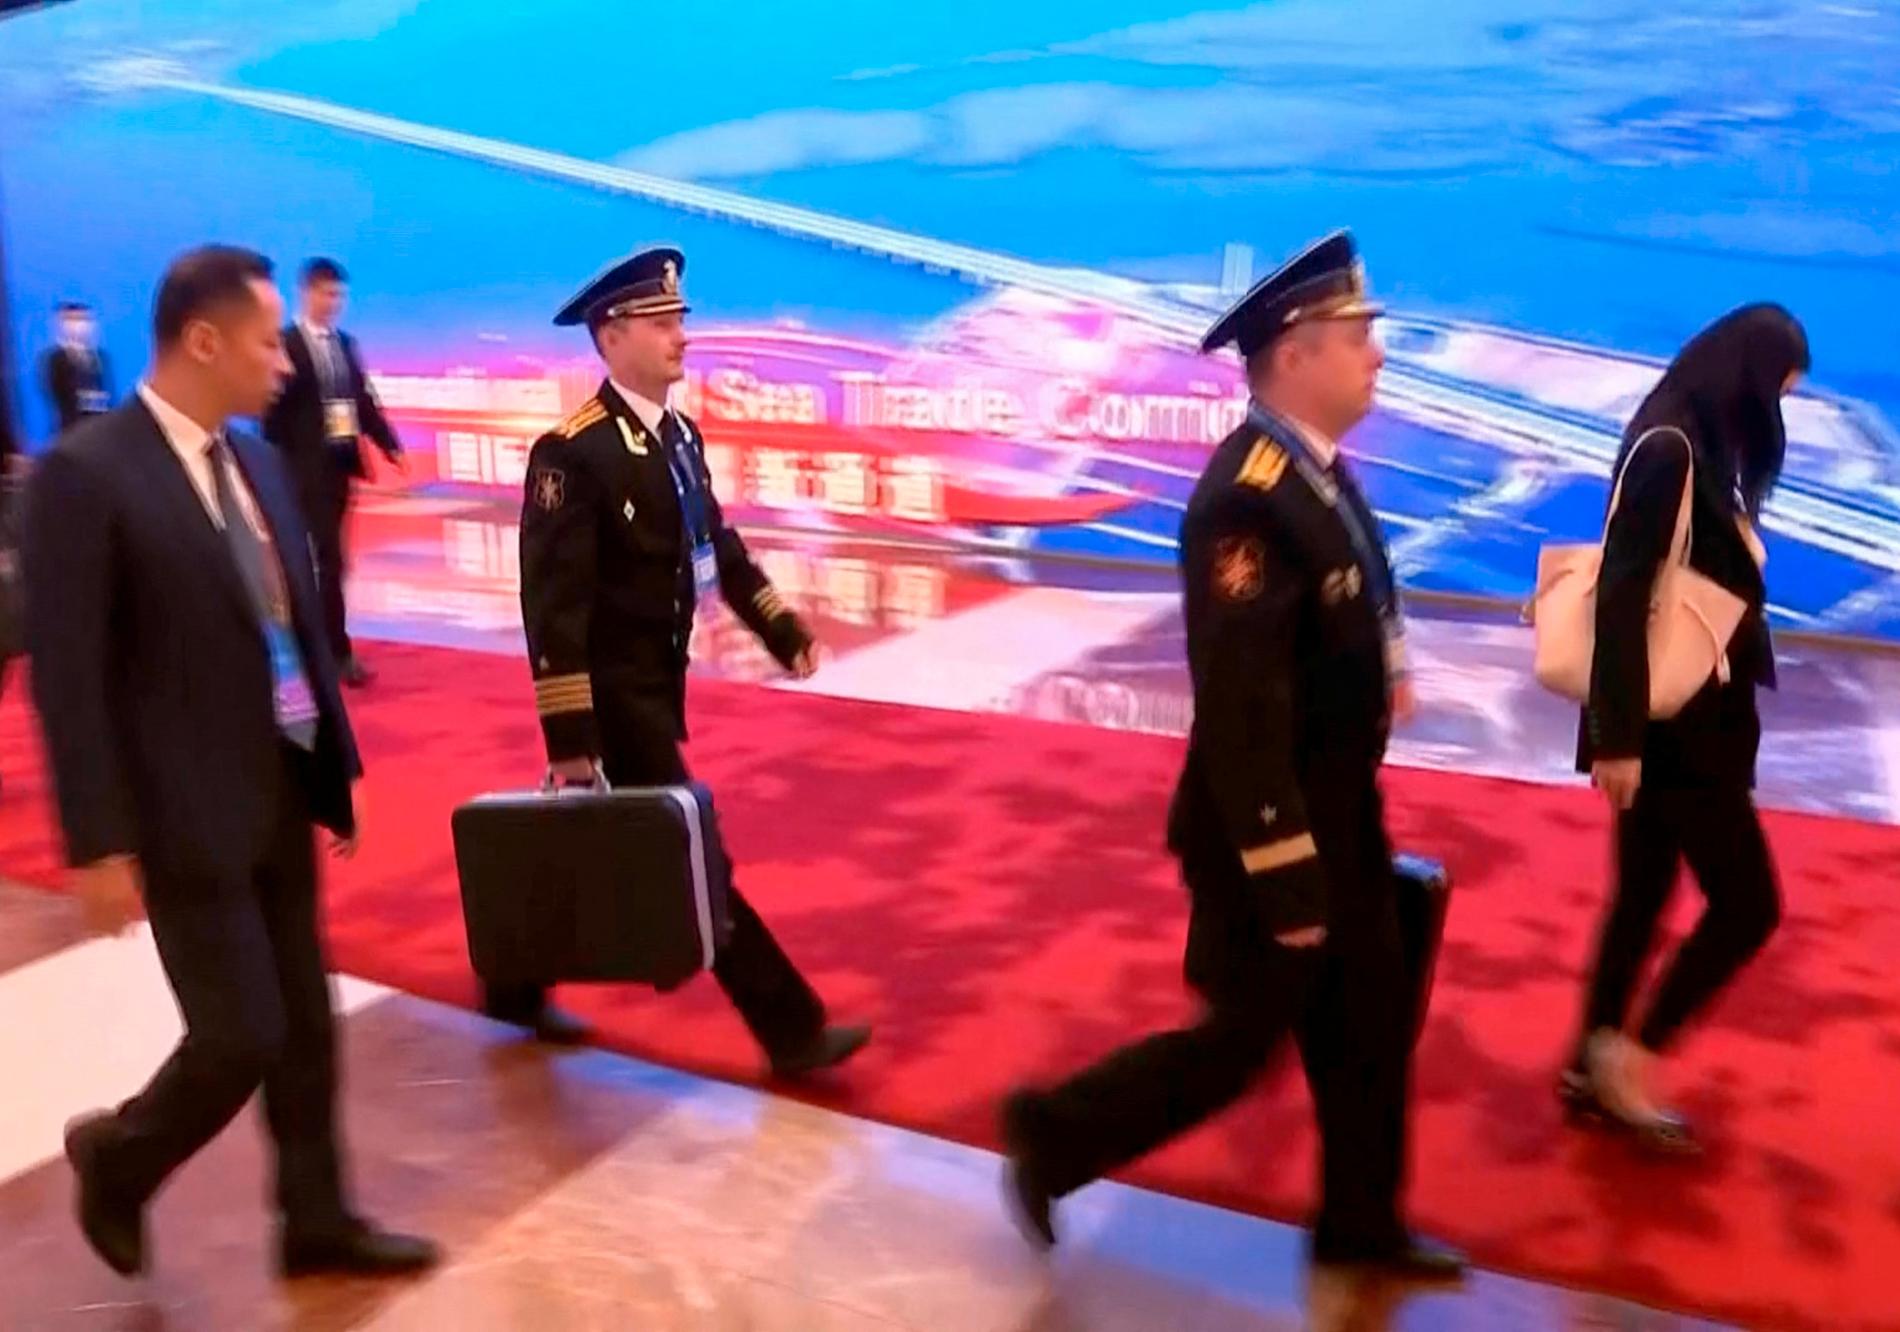 The Kremlin displays Putin’s nuclear suitcases during his visit to China